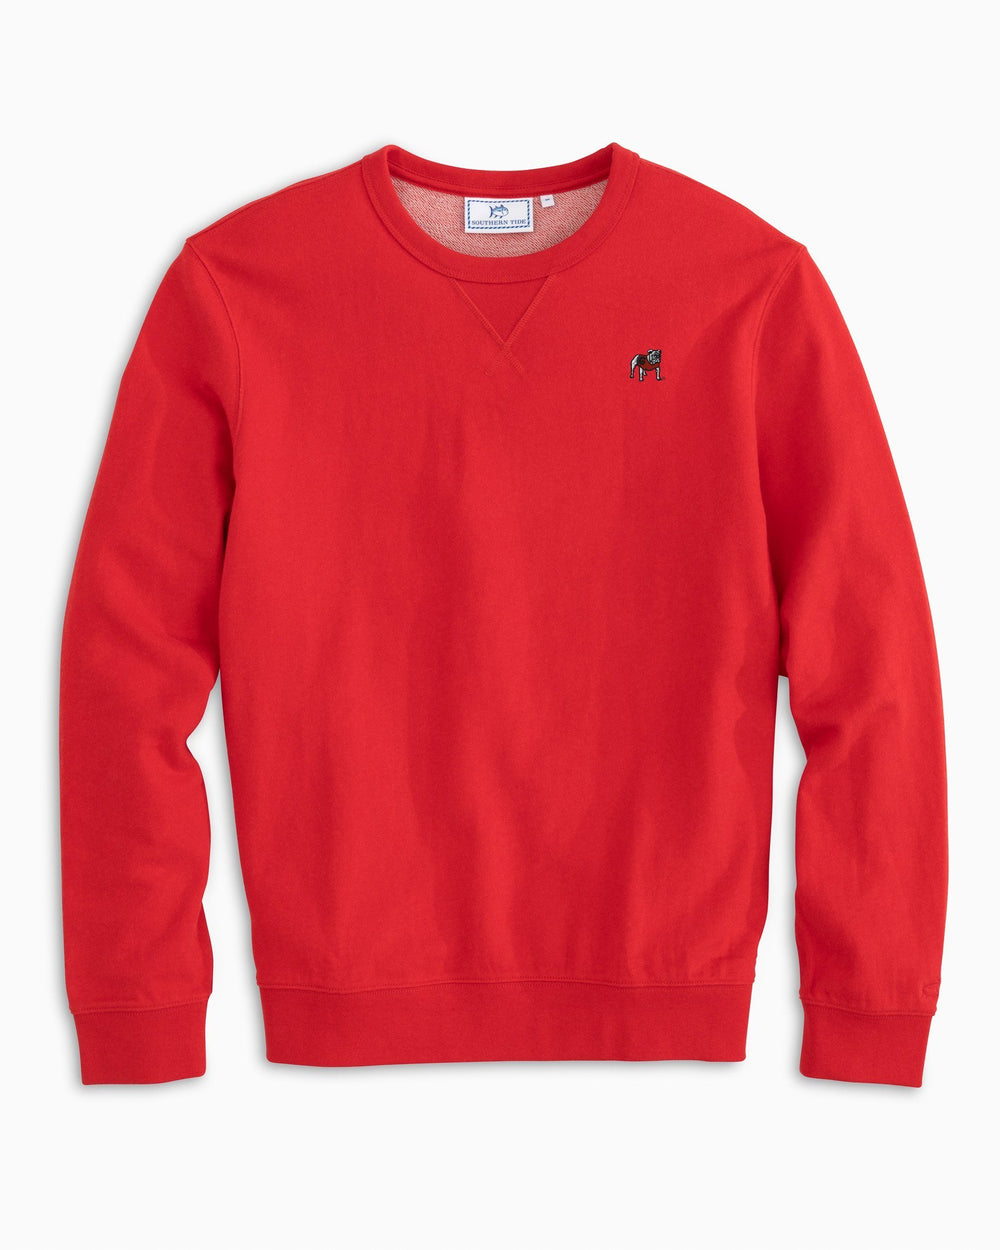 The front view of the Men's Red Georgia Upper Deck Pullover Sweatshirt by Southern Tide - Heather Varsity Red